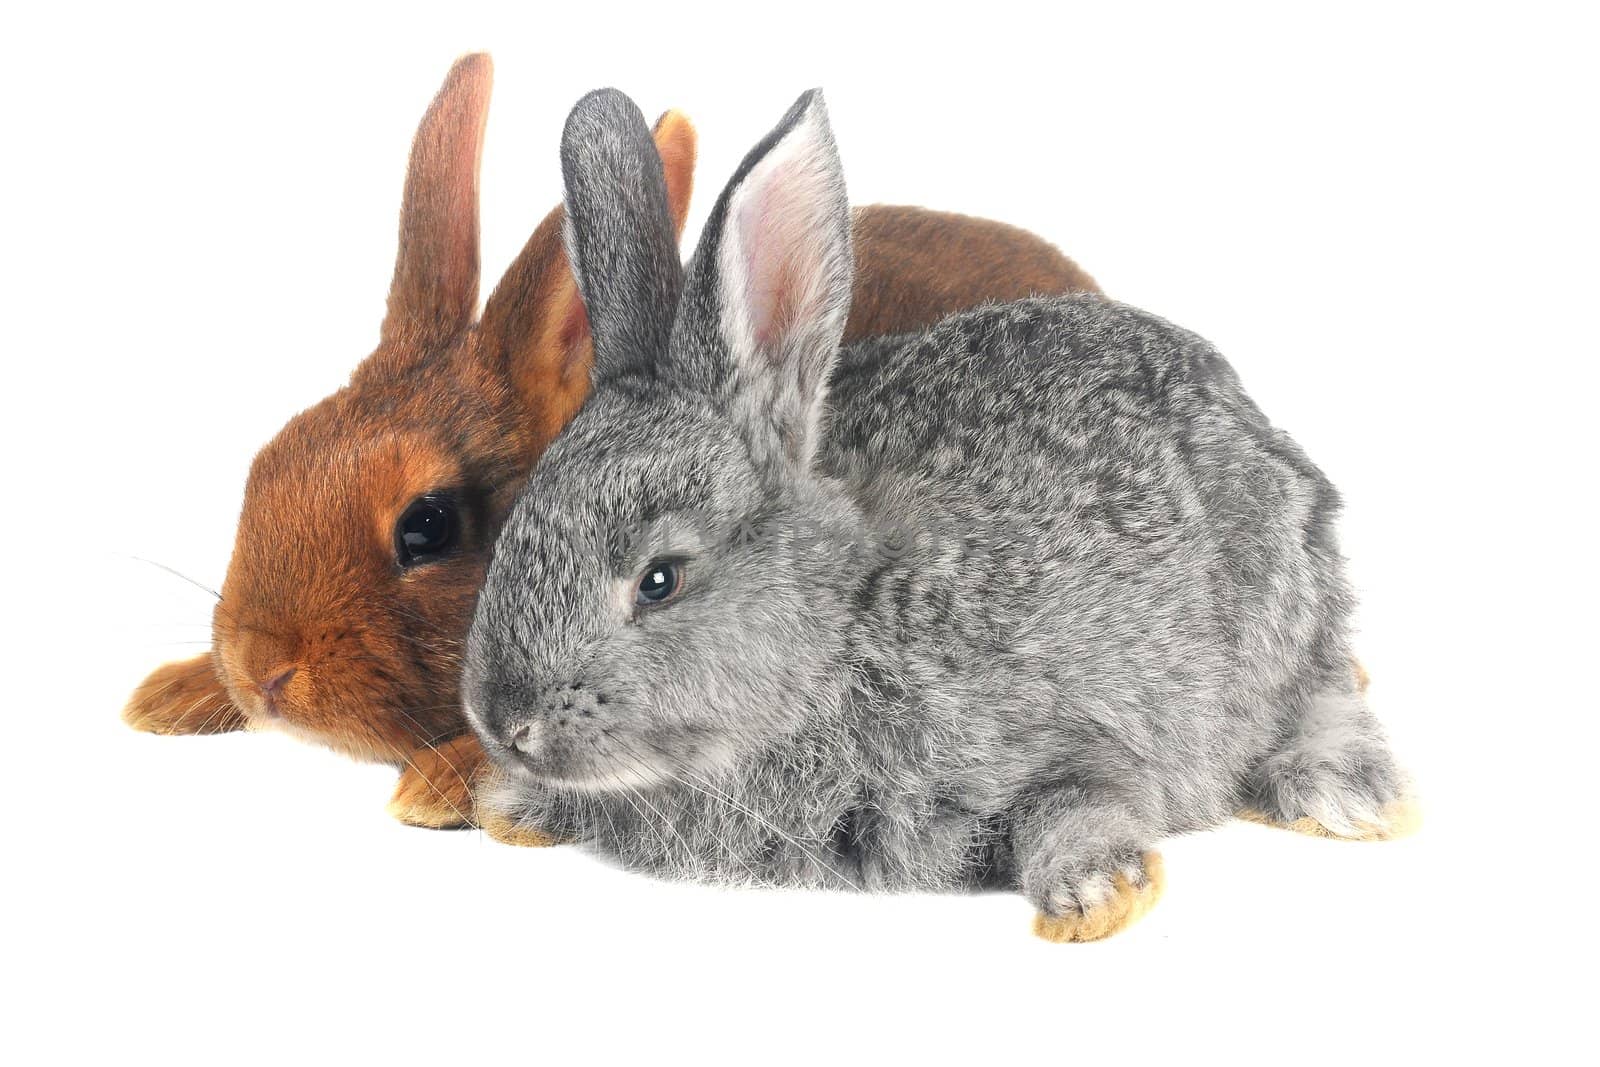 Two rabbits in front of white background